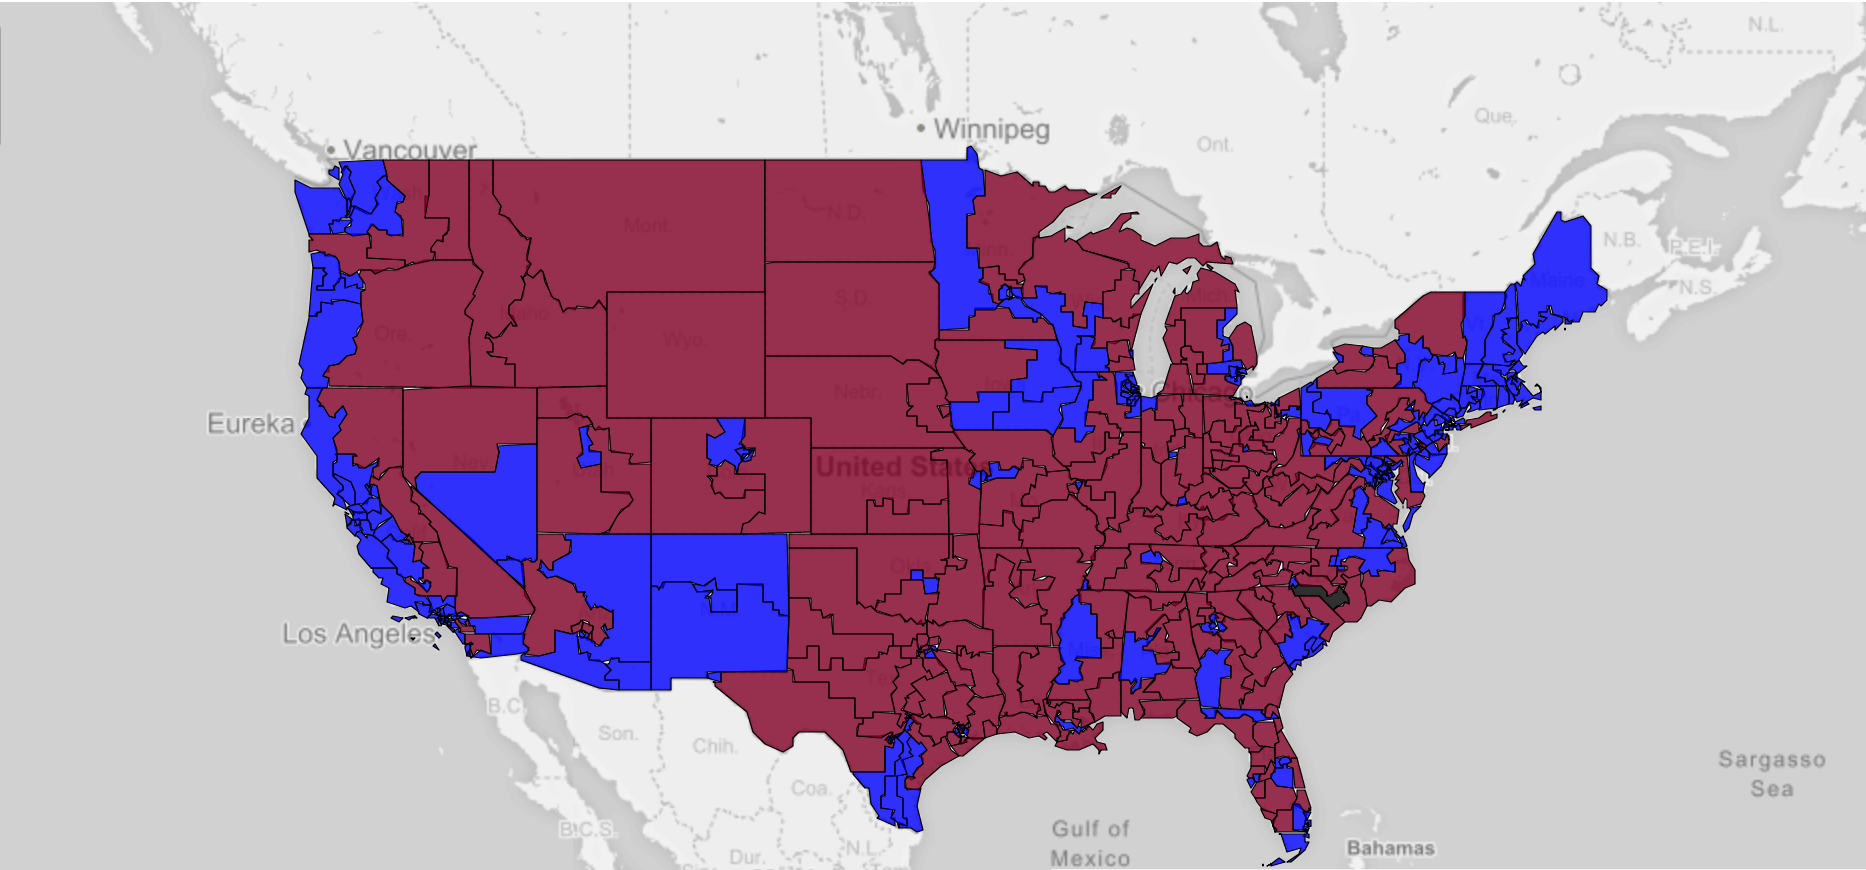 Actual Results of 2018 Congressional Elections